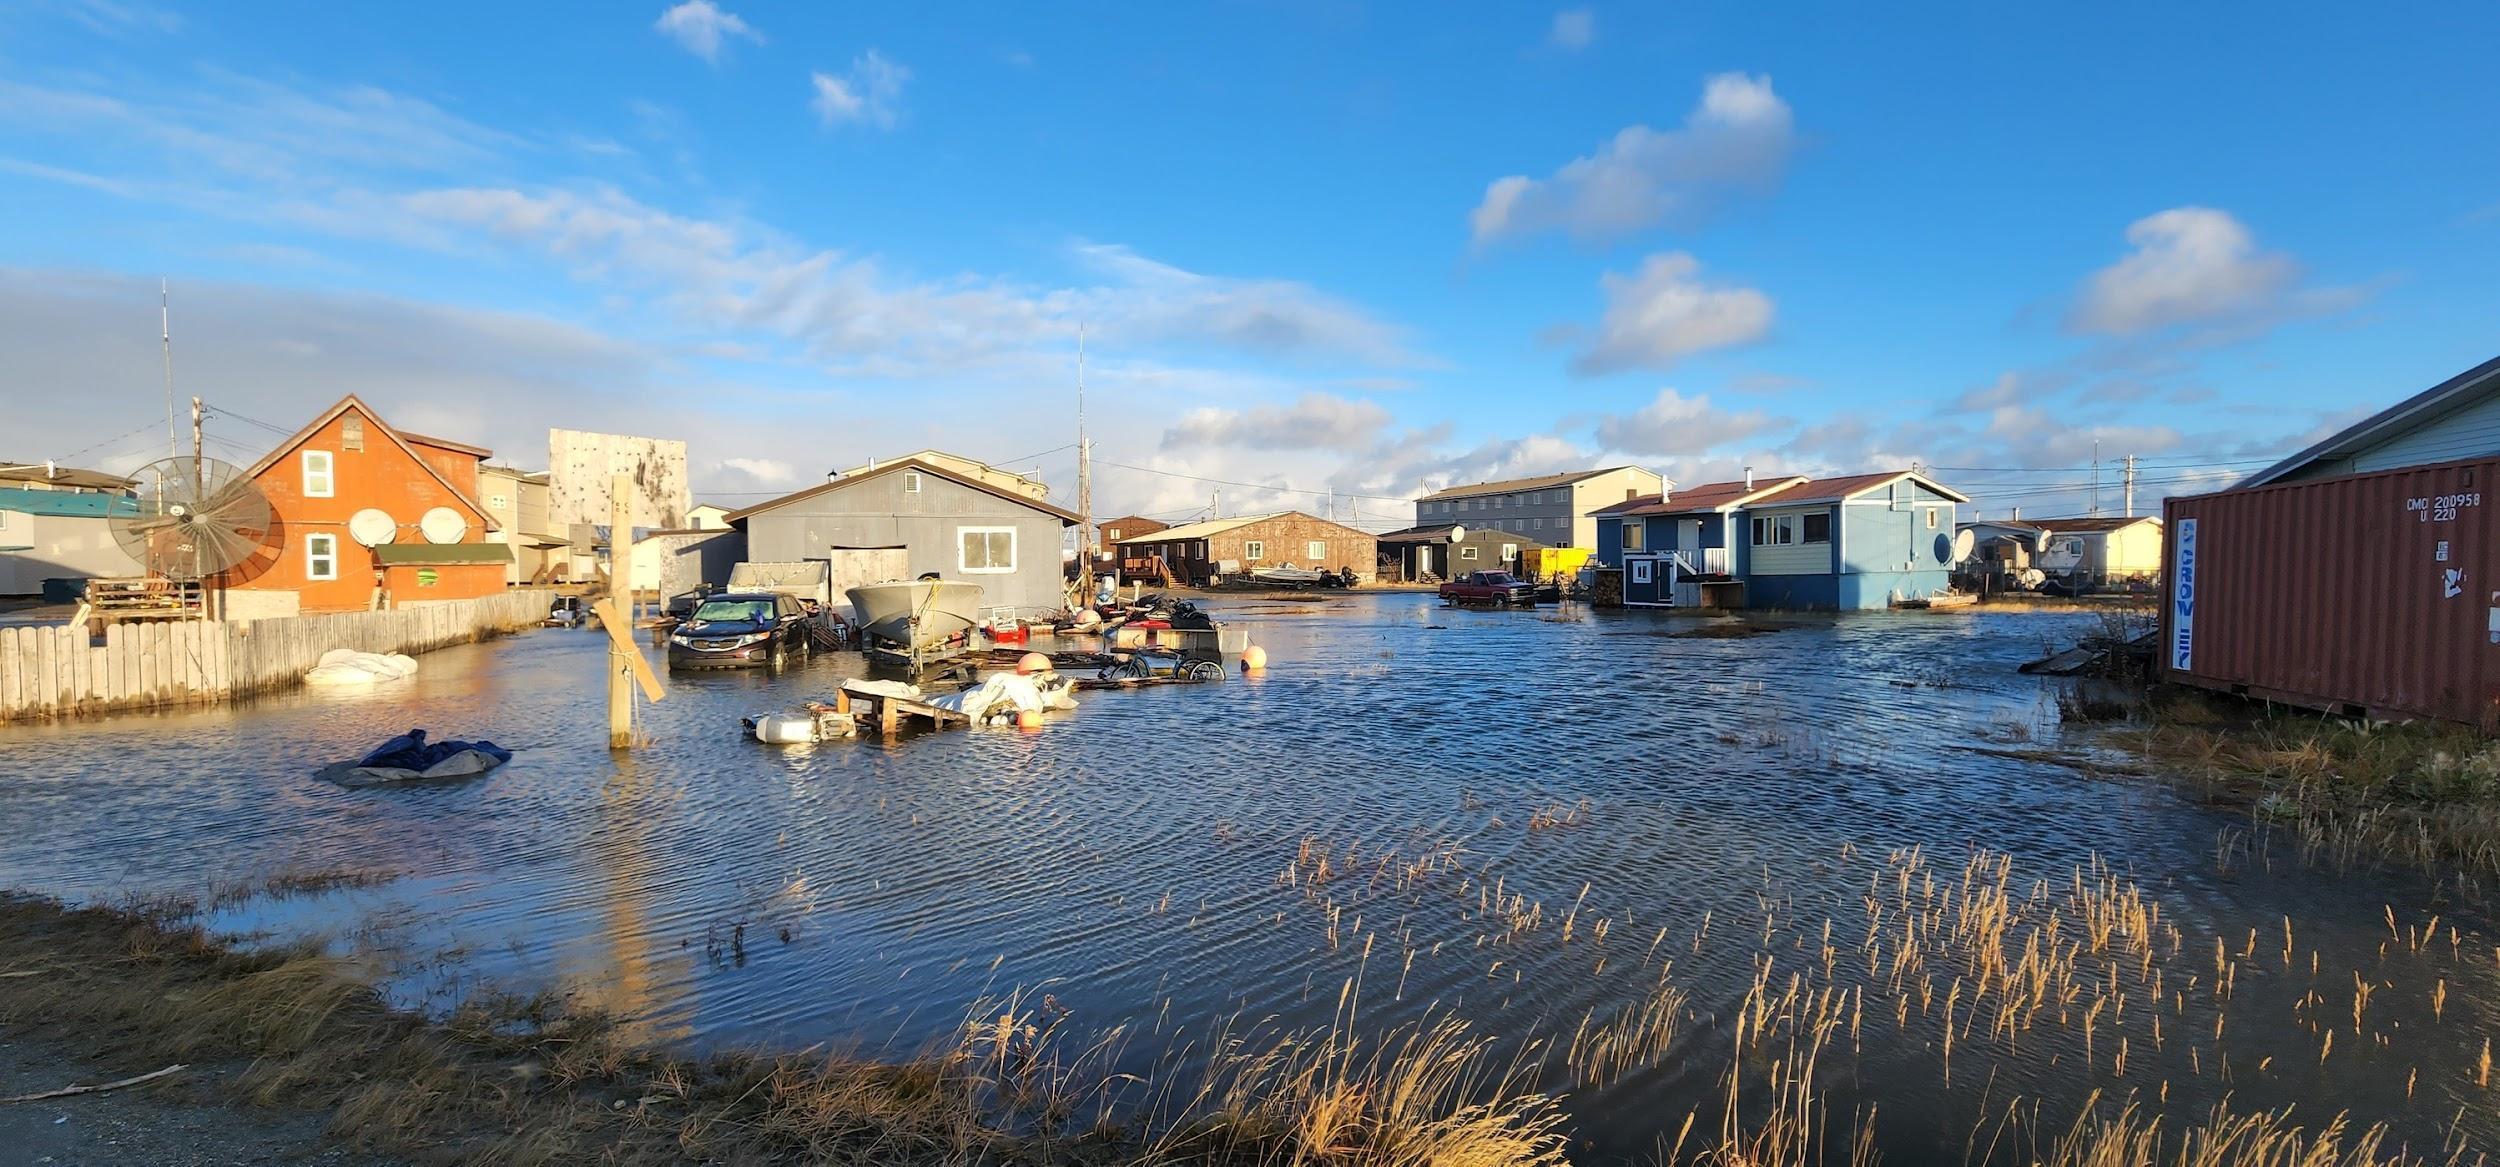 On a sunny day, homes stand in a few feet of flooded, still water.